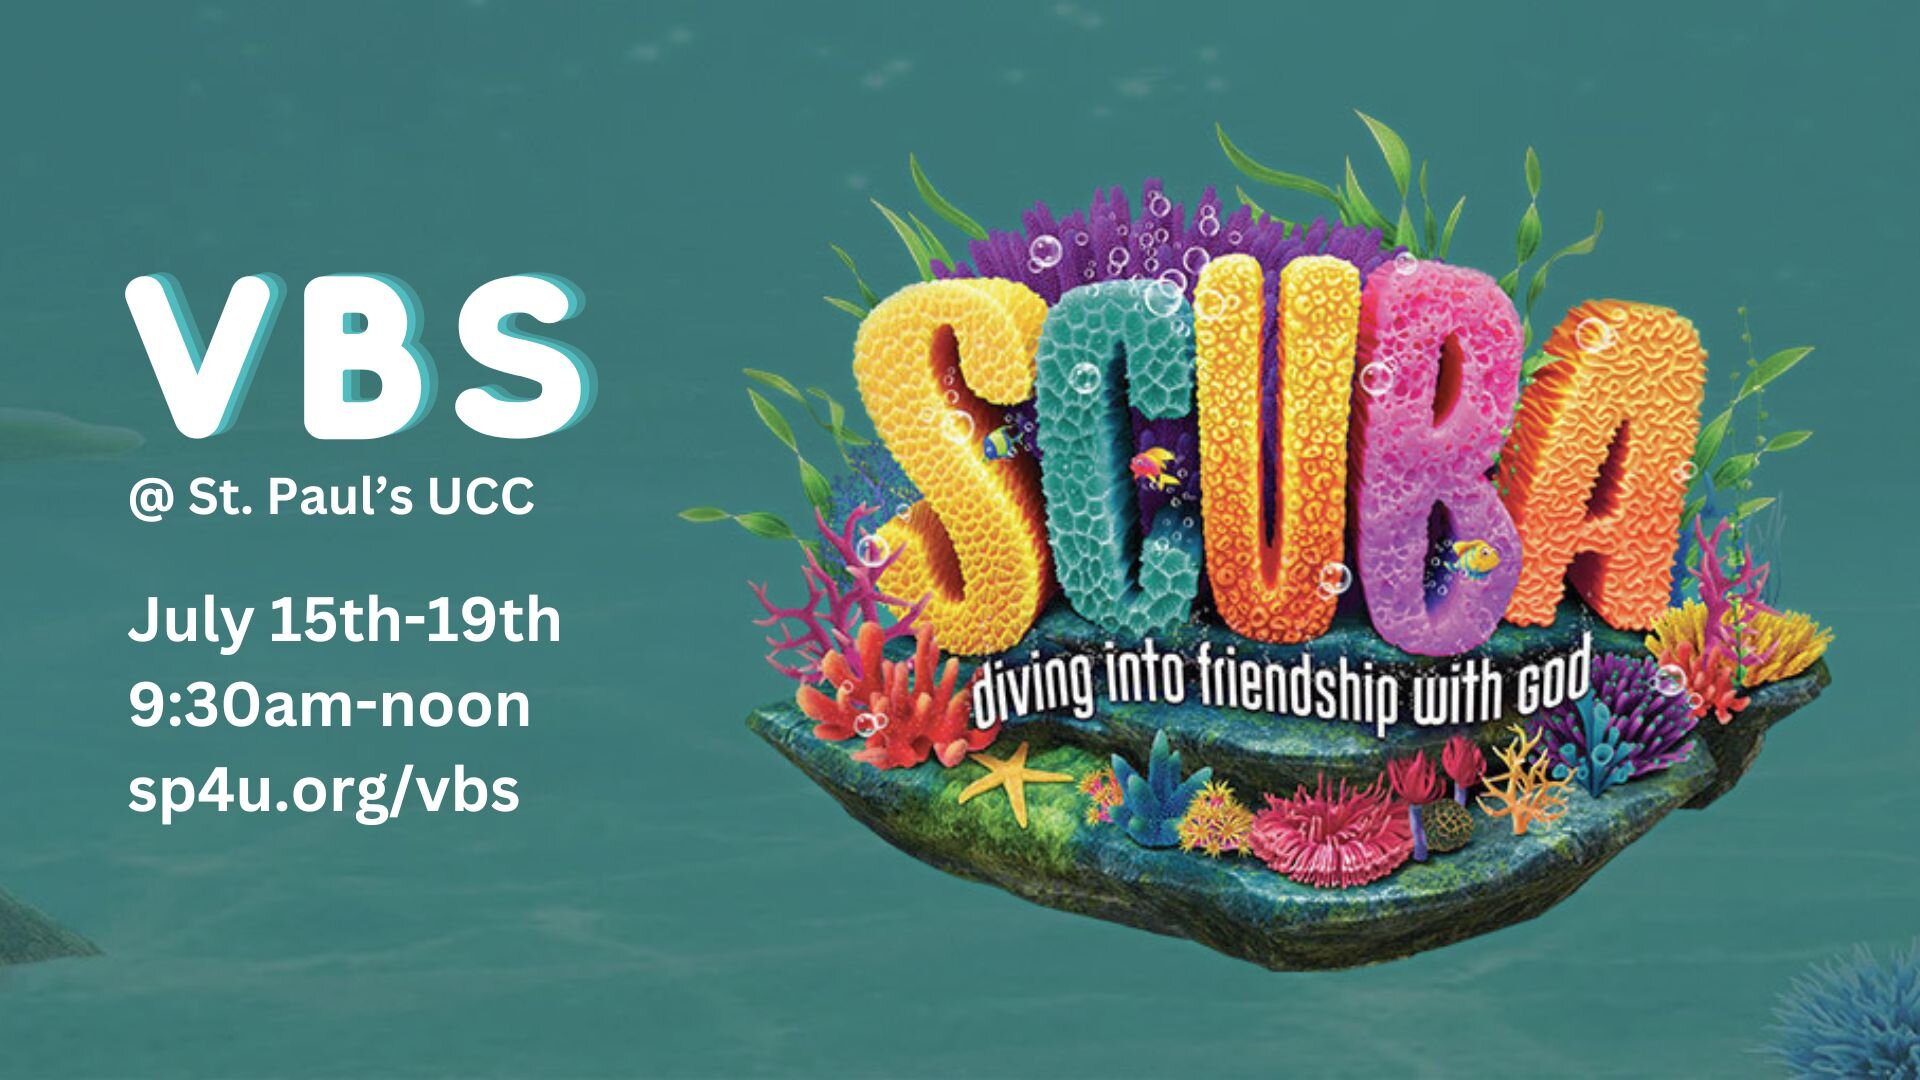 🌊 Dive into an Underwater VBS Adventure with SCUBA! 🐠
This is a free event for kids in Pre-school (potty trained) through 5th grade! 🦀

📝 Sign up your kids at www.sp4u.org/vbs